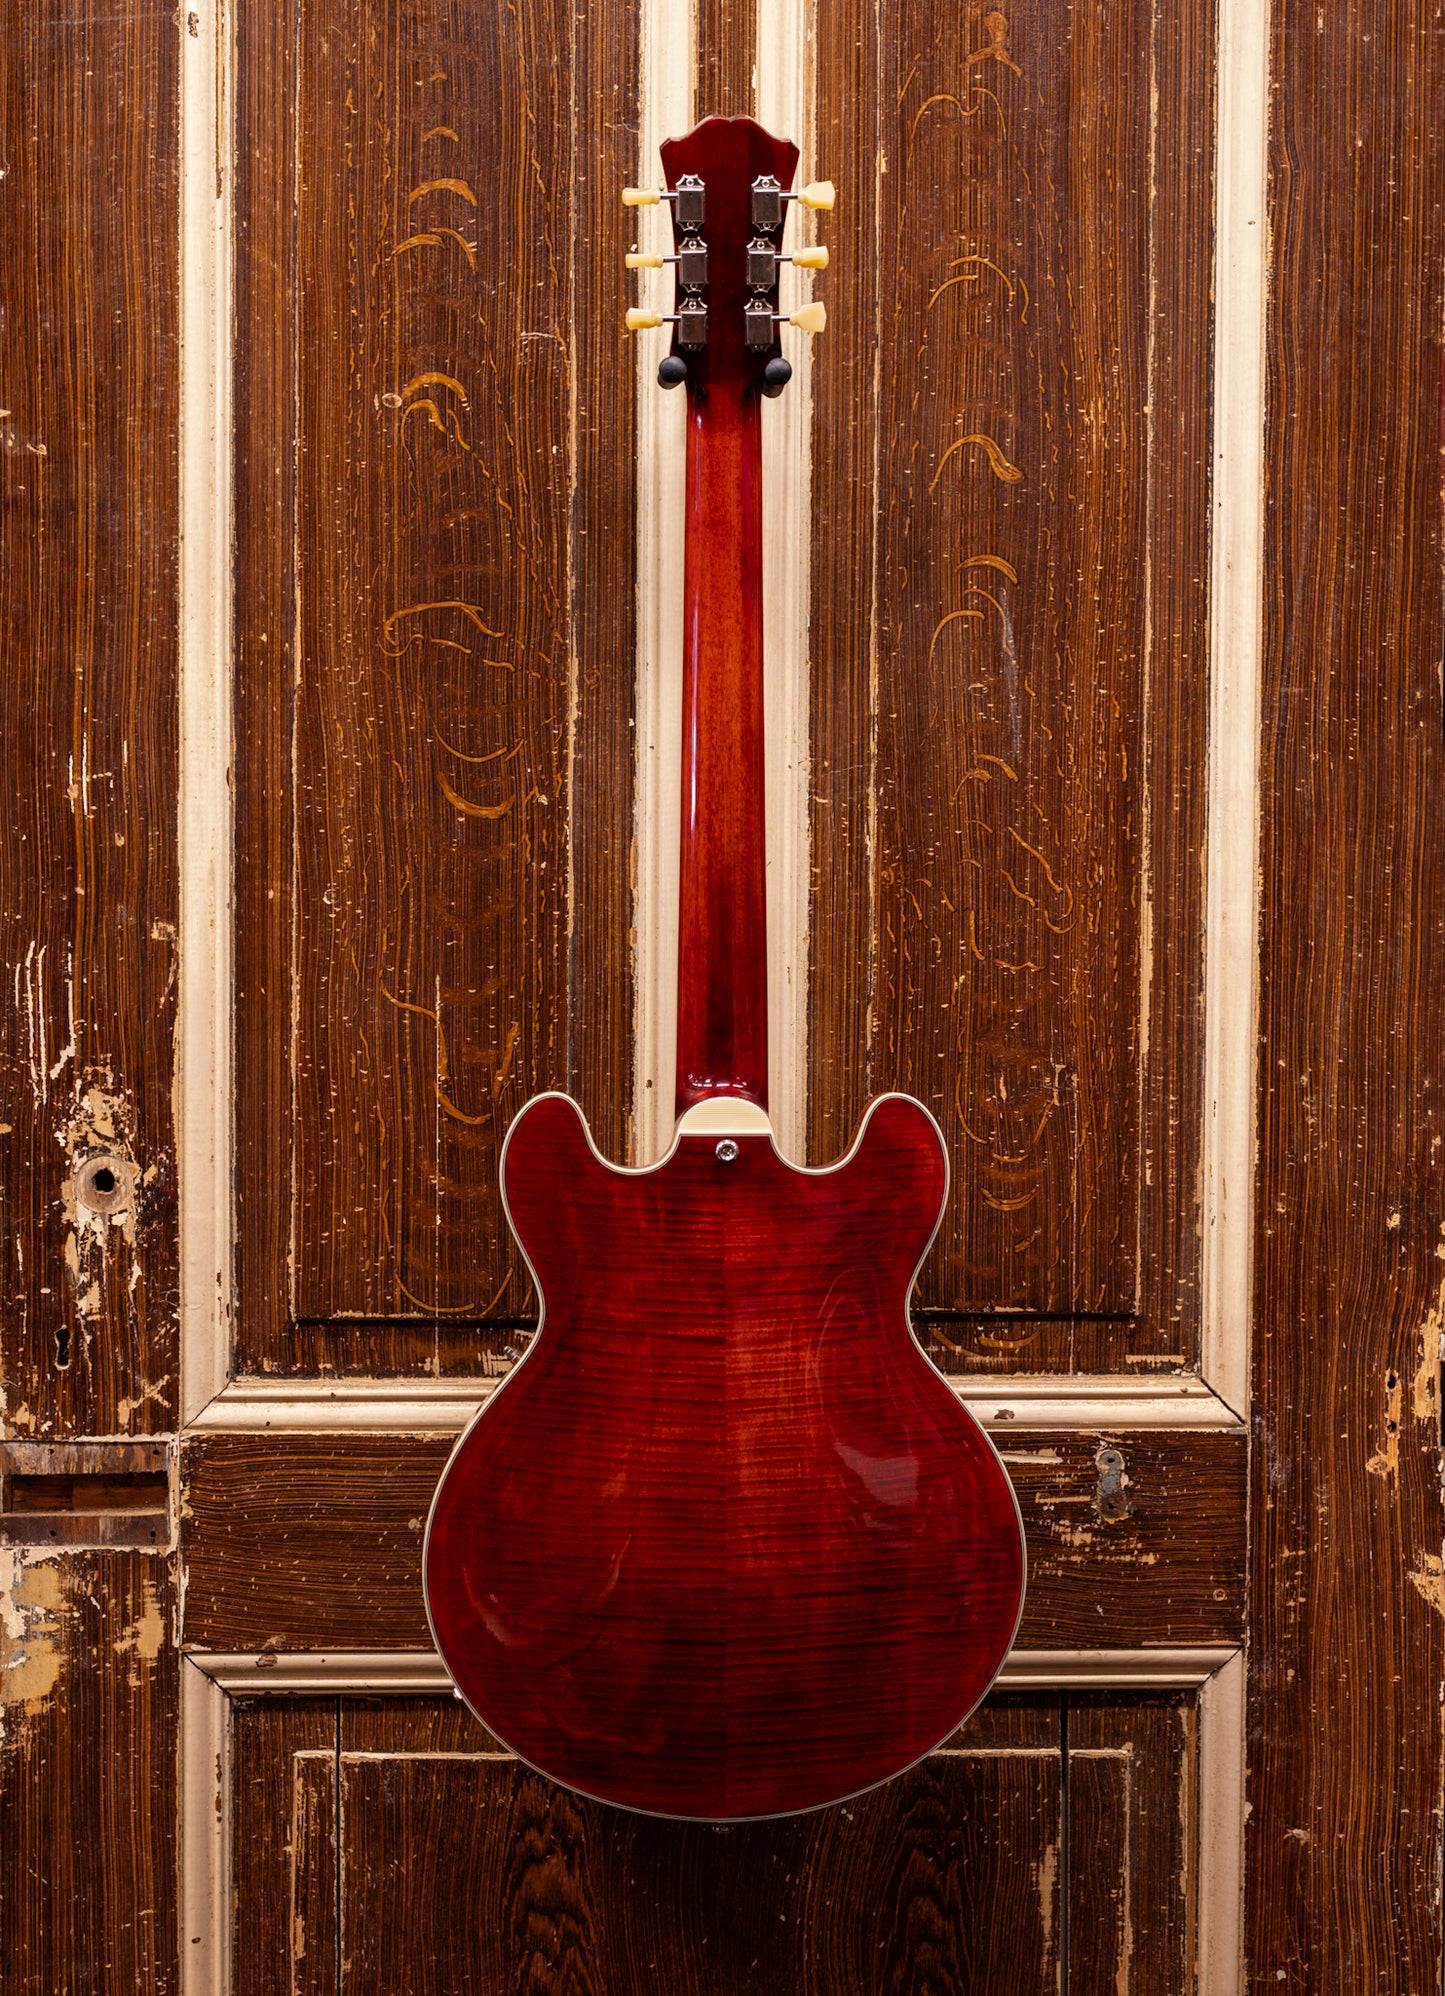 Eastman T484 Classic Thinline (occasion)